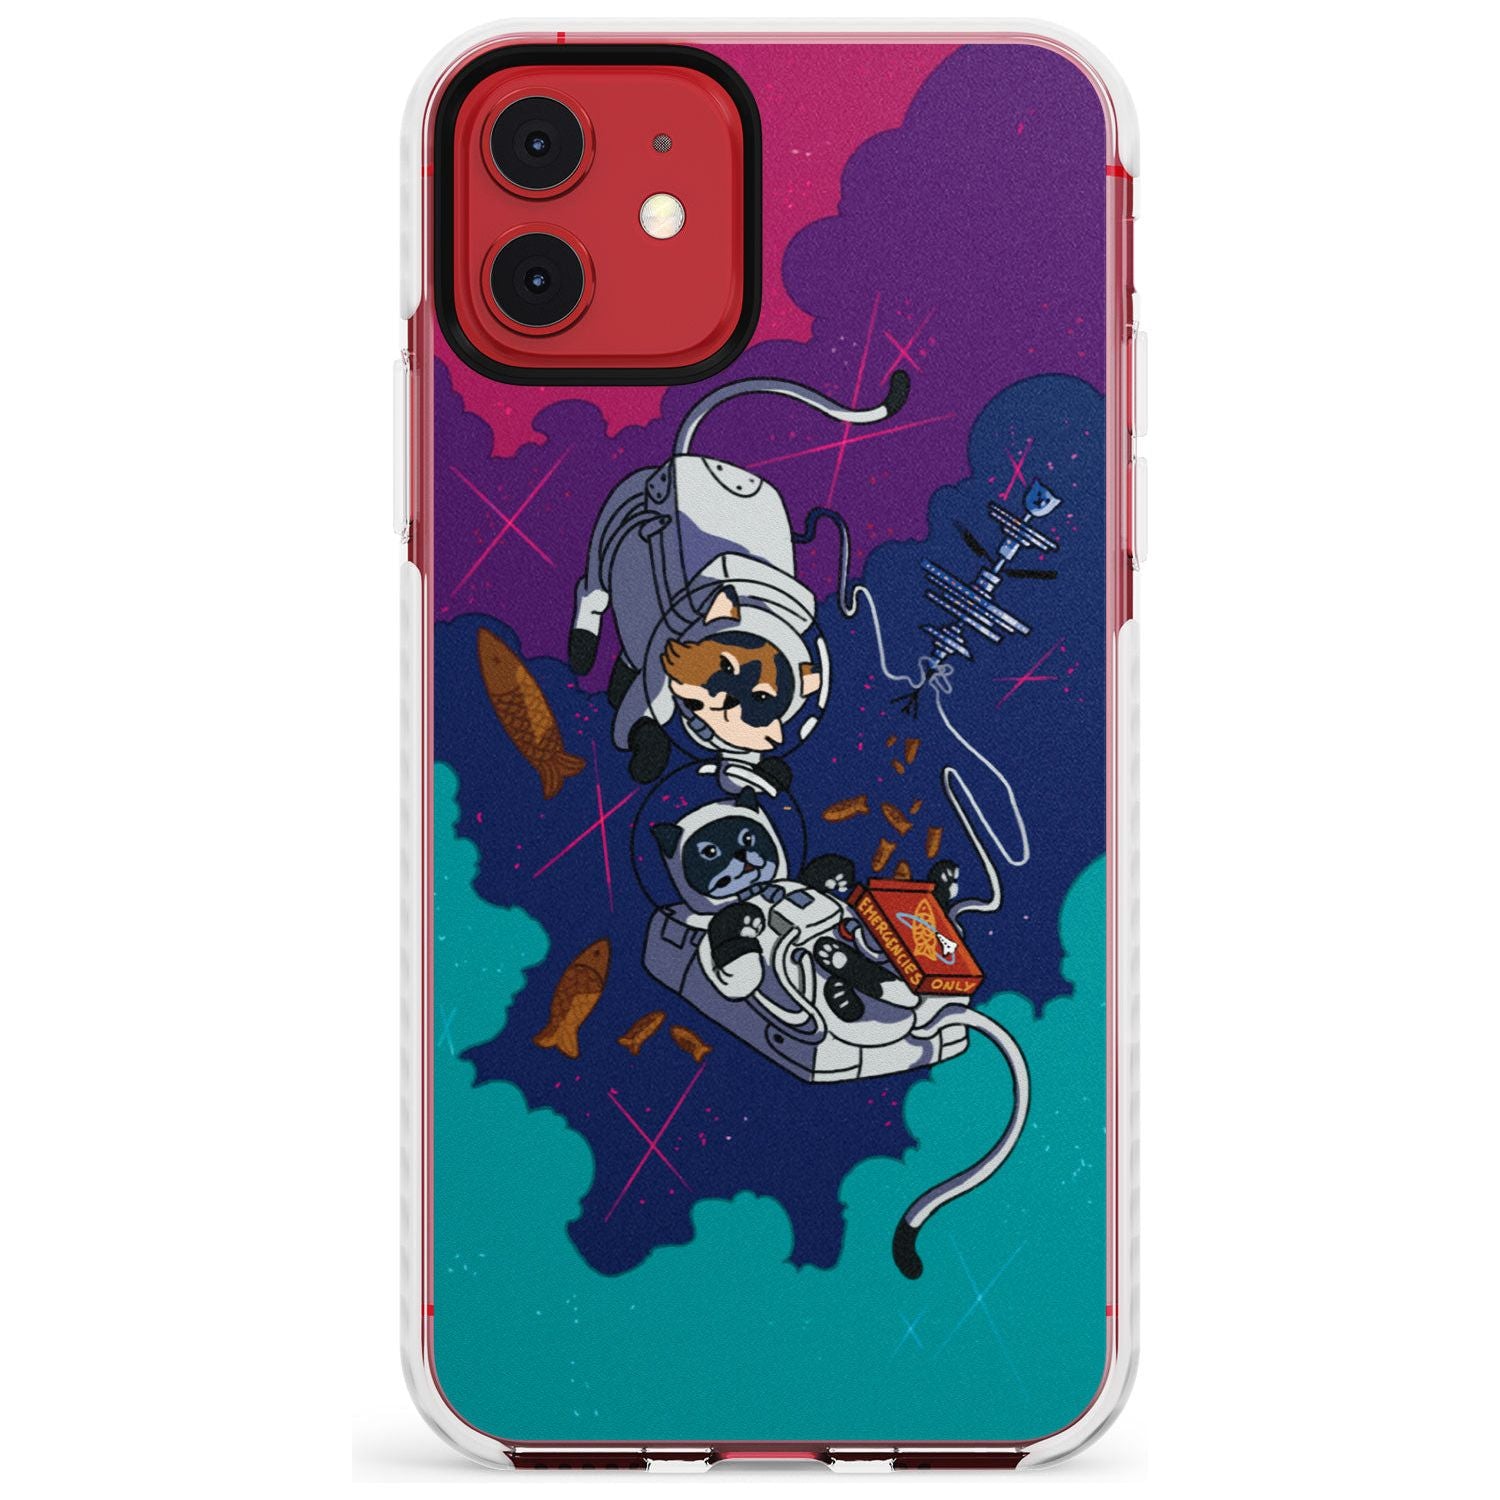 CATS IN SPACE Slim TPU Phone Case for iPhone 11